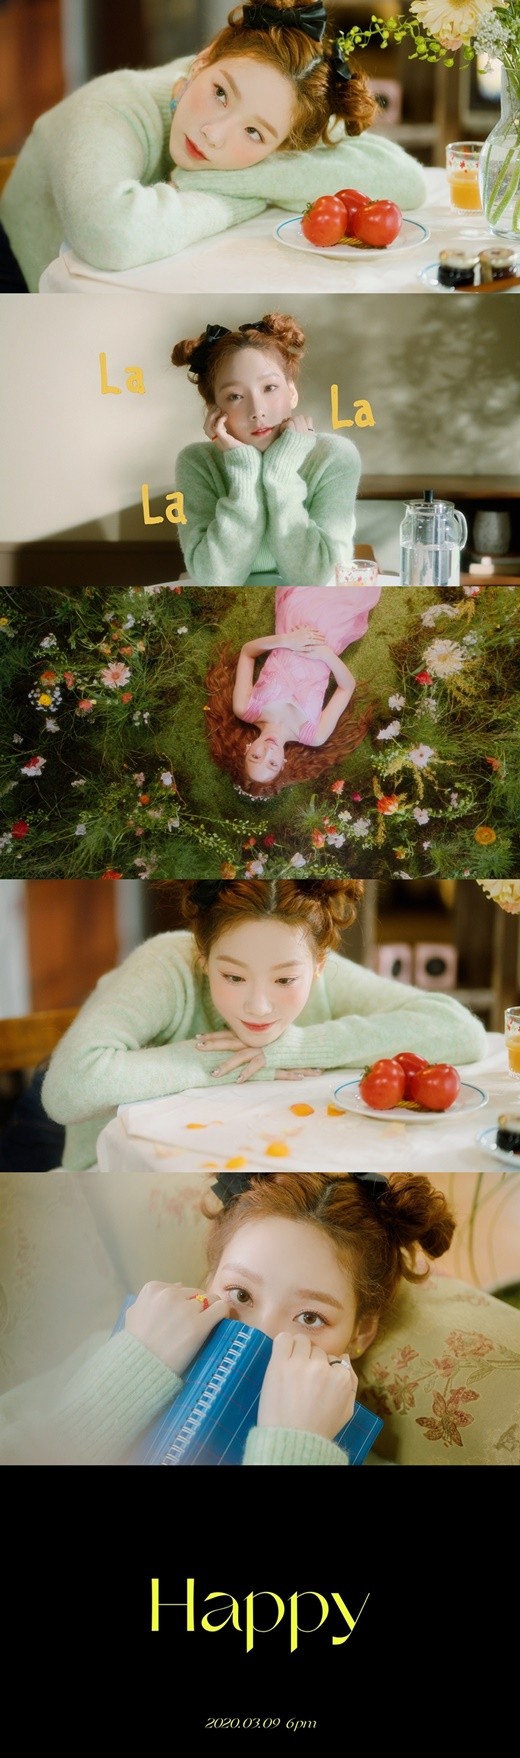 The Teaser video of Girls Generations Taeyeon new song Happy Music Video was released.The Teaser video of the new song Happy (Happy) Music Video released on Taeyeons official website, YouTube, and Naver TV SMTOWN channels on the 7th is attracting attention because it can meet Taeyeons appearance that emits a lovely charm in a warm and warm atmosphere.The new song Happy is an R & B pop genre song that reinterprets Old School Duwab and R & B with modern sound.Taeyeon is raising expectations as she plans to communicate with fans by conducting live broadcast Happy_TAEYEON_Day on Naver V Lives SMTOWN channel to commemorate the release of the new song at 7 p.m. on the 9th.On the other hand, Taeyeons new song Happy will be released on various Music sites at 6 pm on the 9th, and the Music Video will be opened simultaneously.